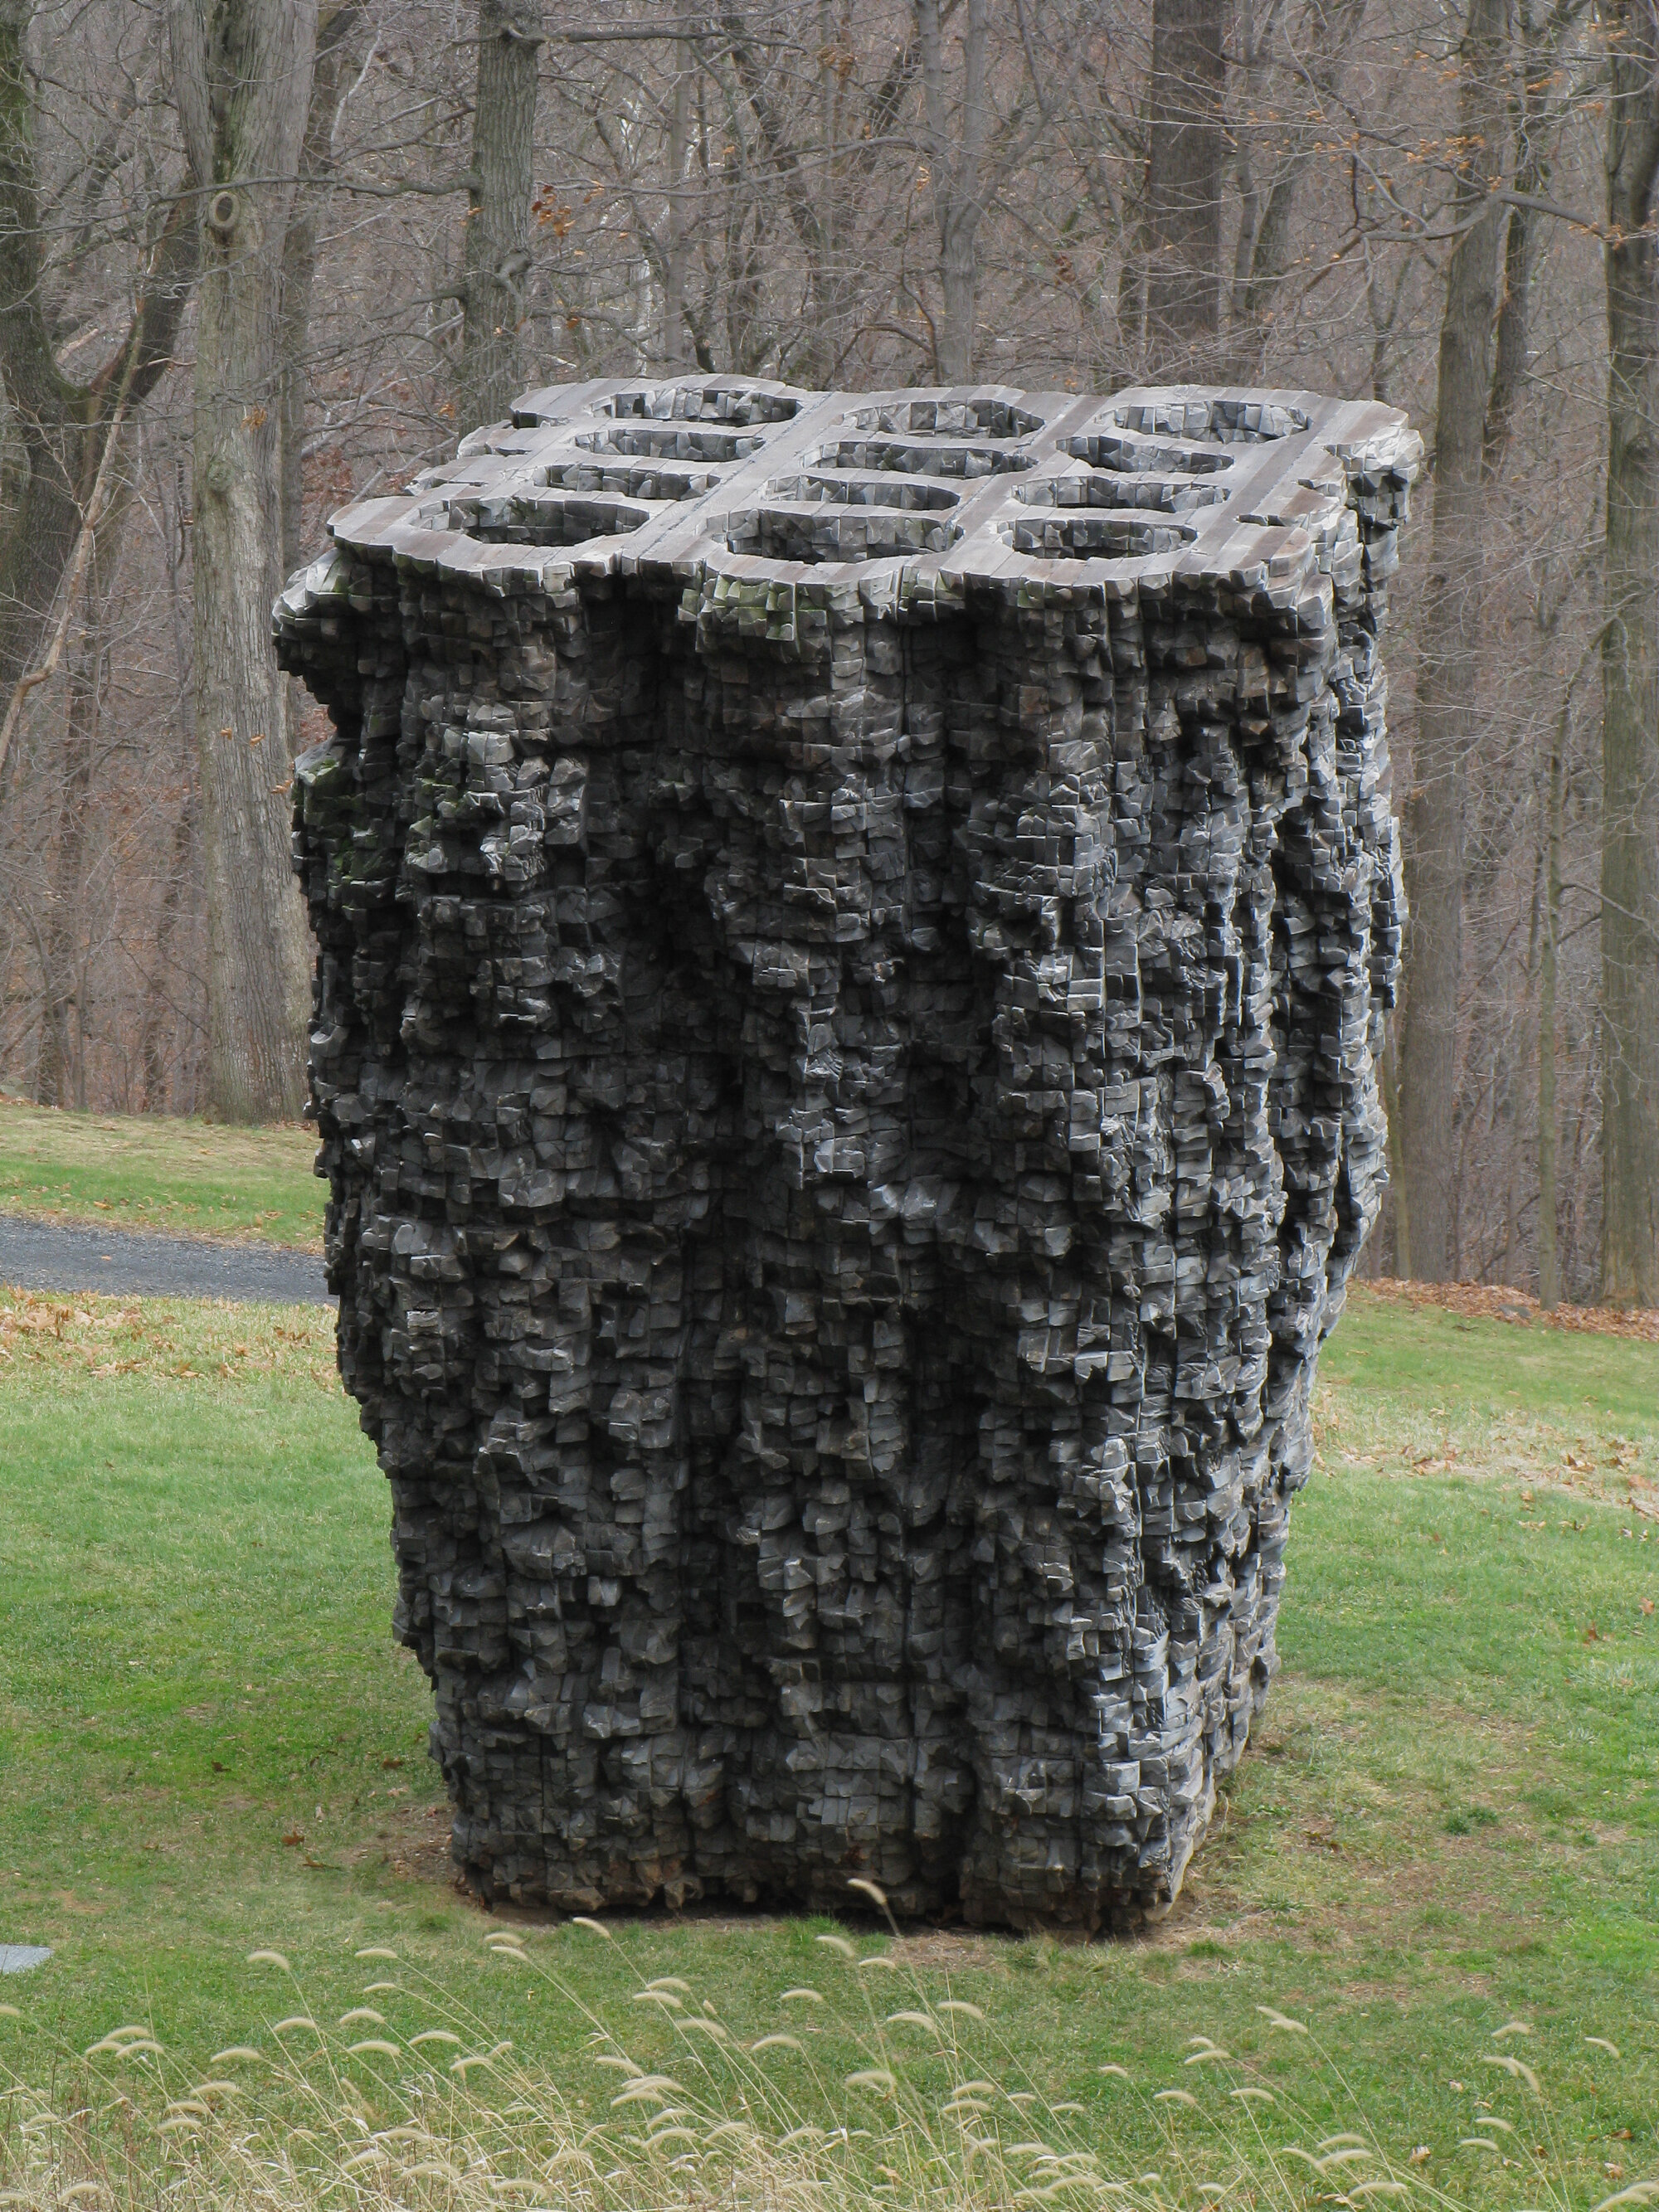       For Paul , 1990-92 Cedar and graphite 210 x 108 x 164 in.    MORE IMAGES   Storm King Art Center  